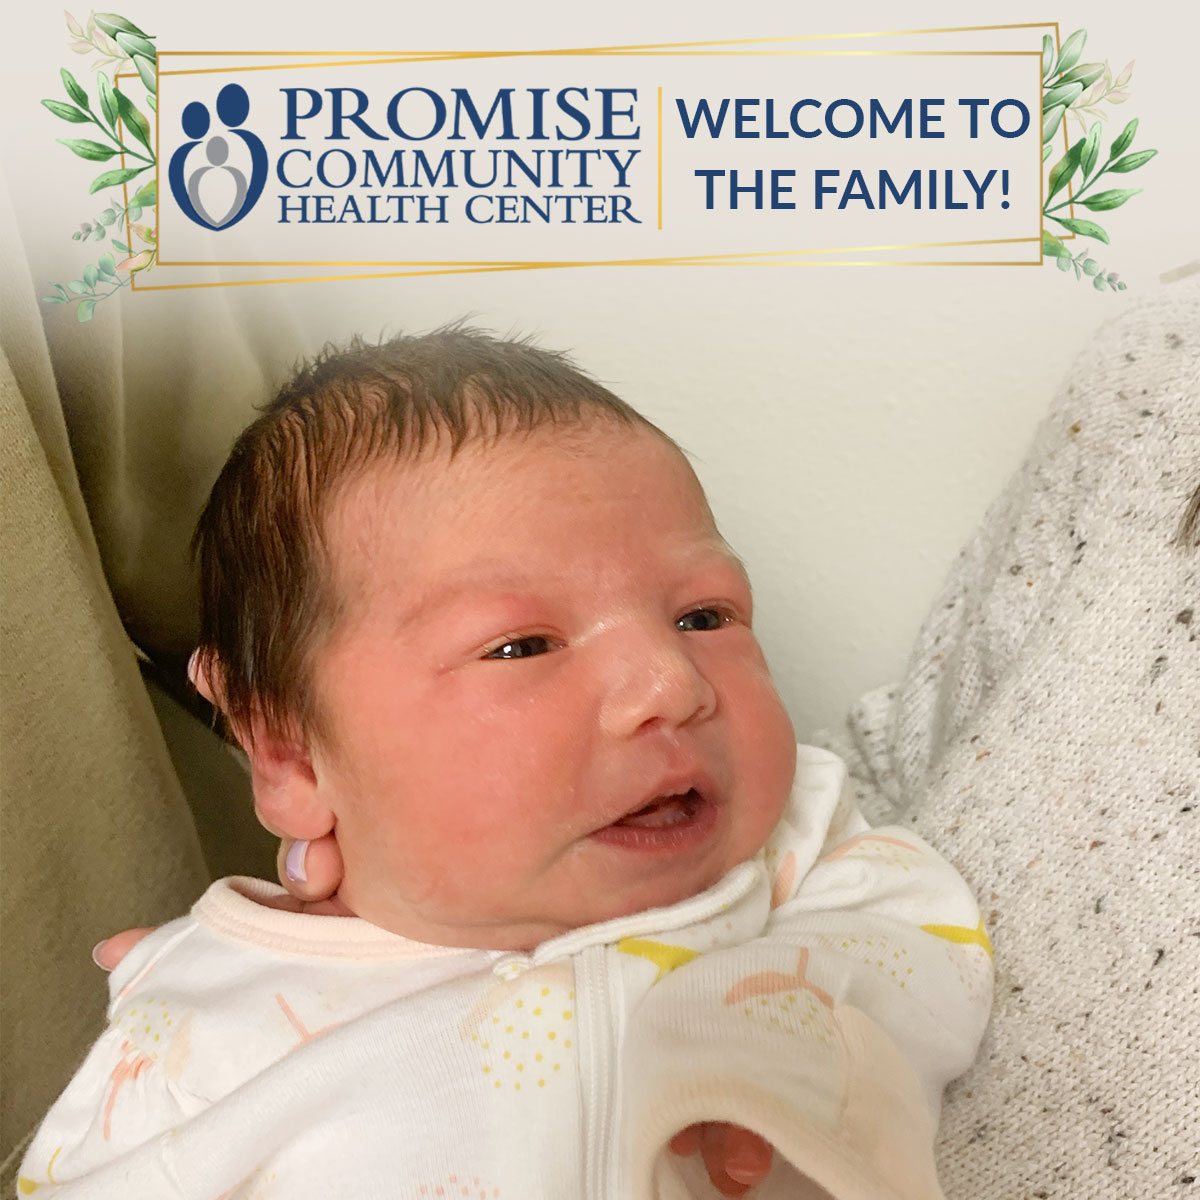 The Schniders opened their home for Rhodes's home birth in Sheldon, Iowa. Certified Nurse Midwife Kari Ney and OB Nurse Kris Tinklenberg helped deliver Miss Rhodes during the birth at their home.